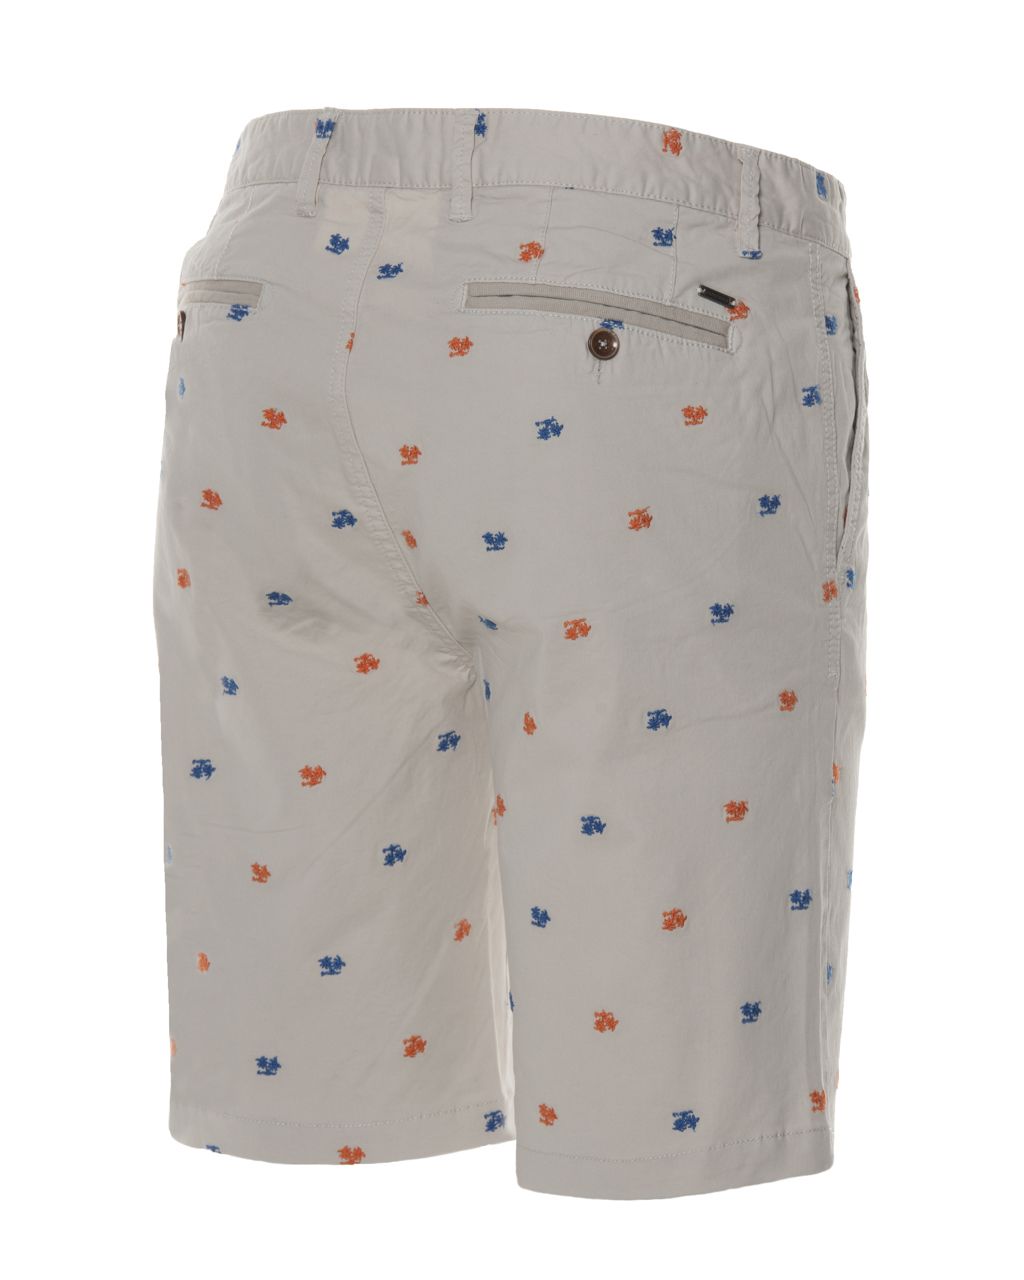 Campbell Classic Short Off white dessin 053810-001-31